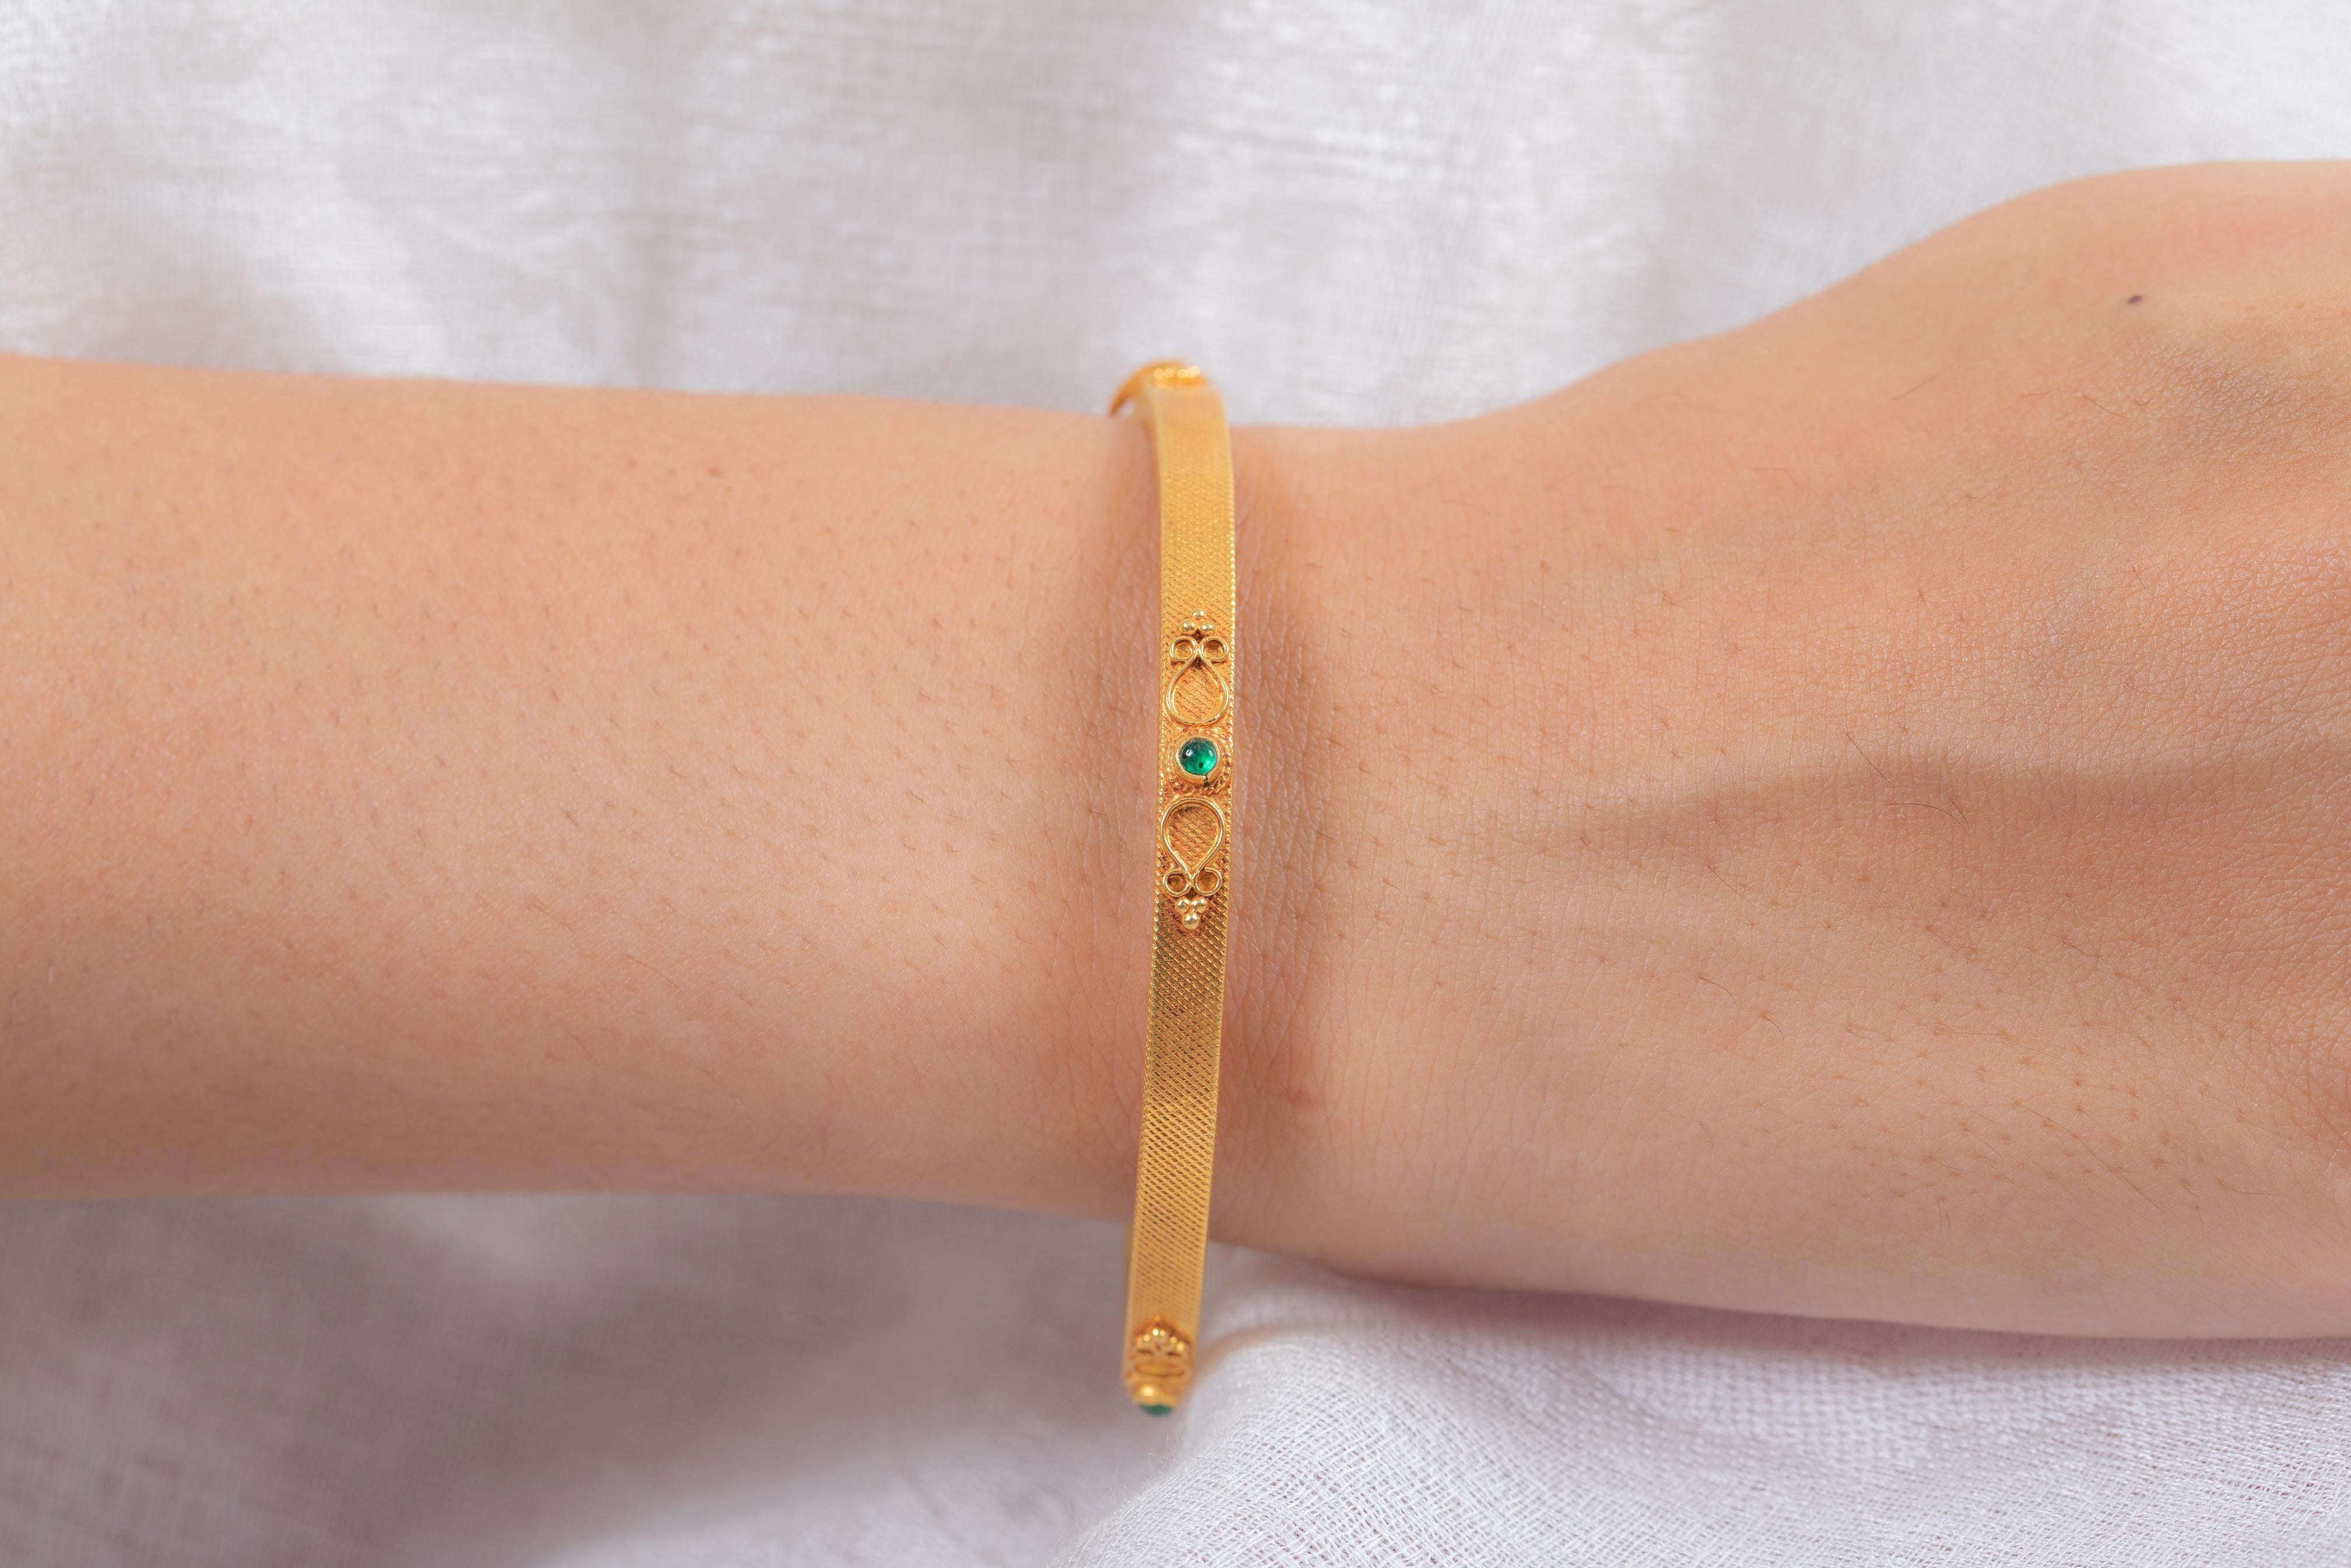 Emerald Bangle with a traditional engraving on it in 18K Gold. It’s a great jewelry ornament to wear on occasions and at the same time works as a wonderful gift for your loved ones. These lovely statement pieces are perfect generation jewelry to